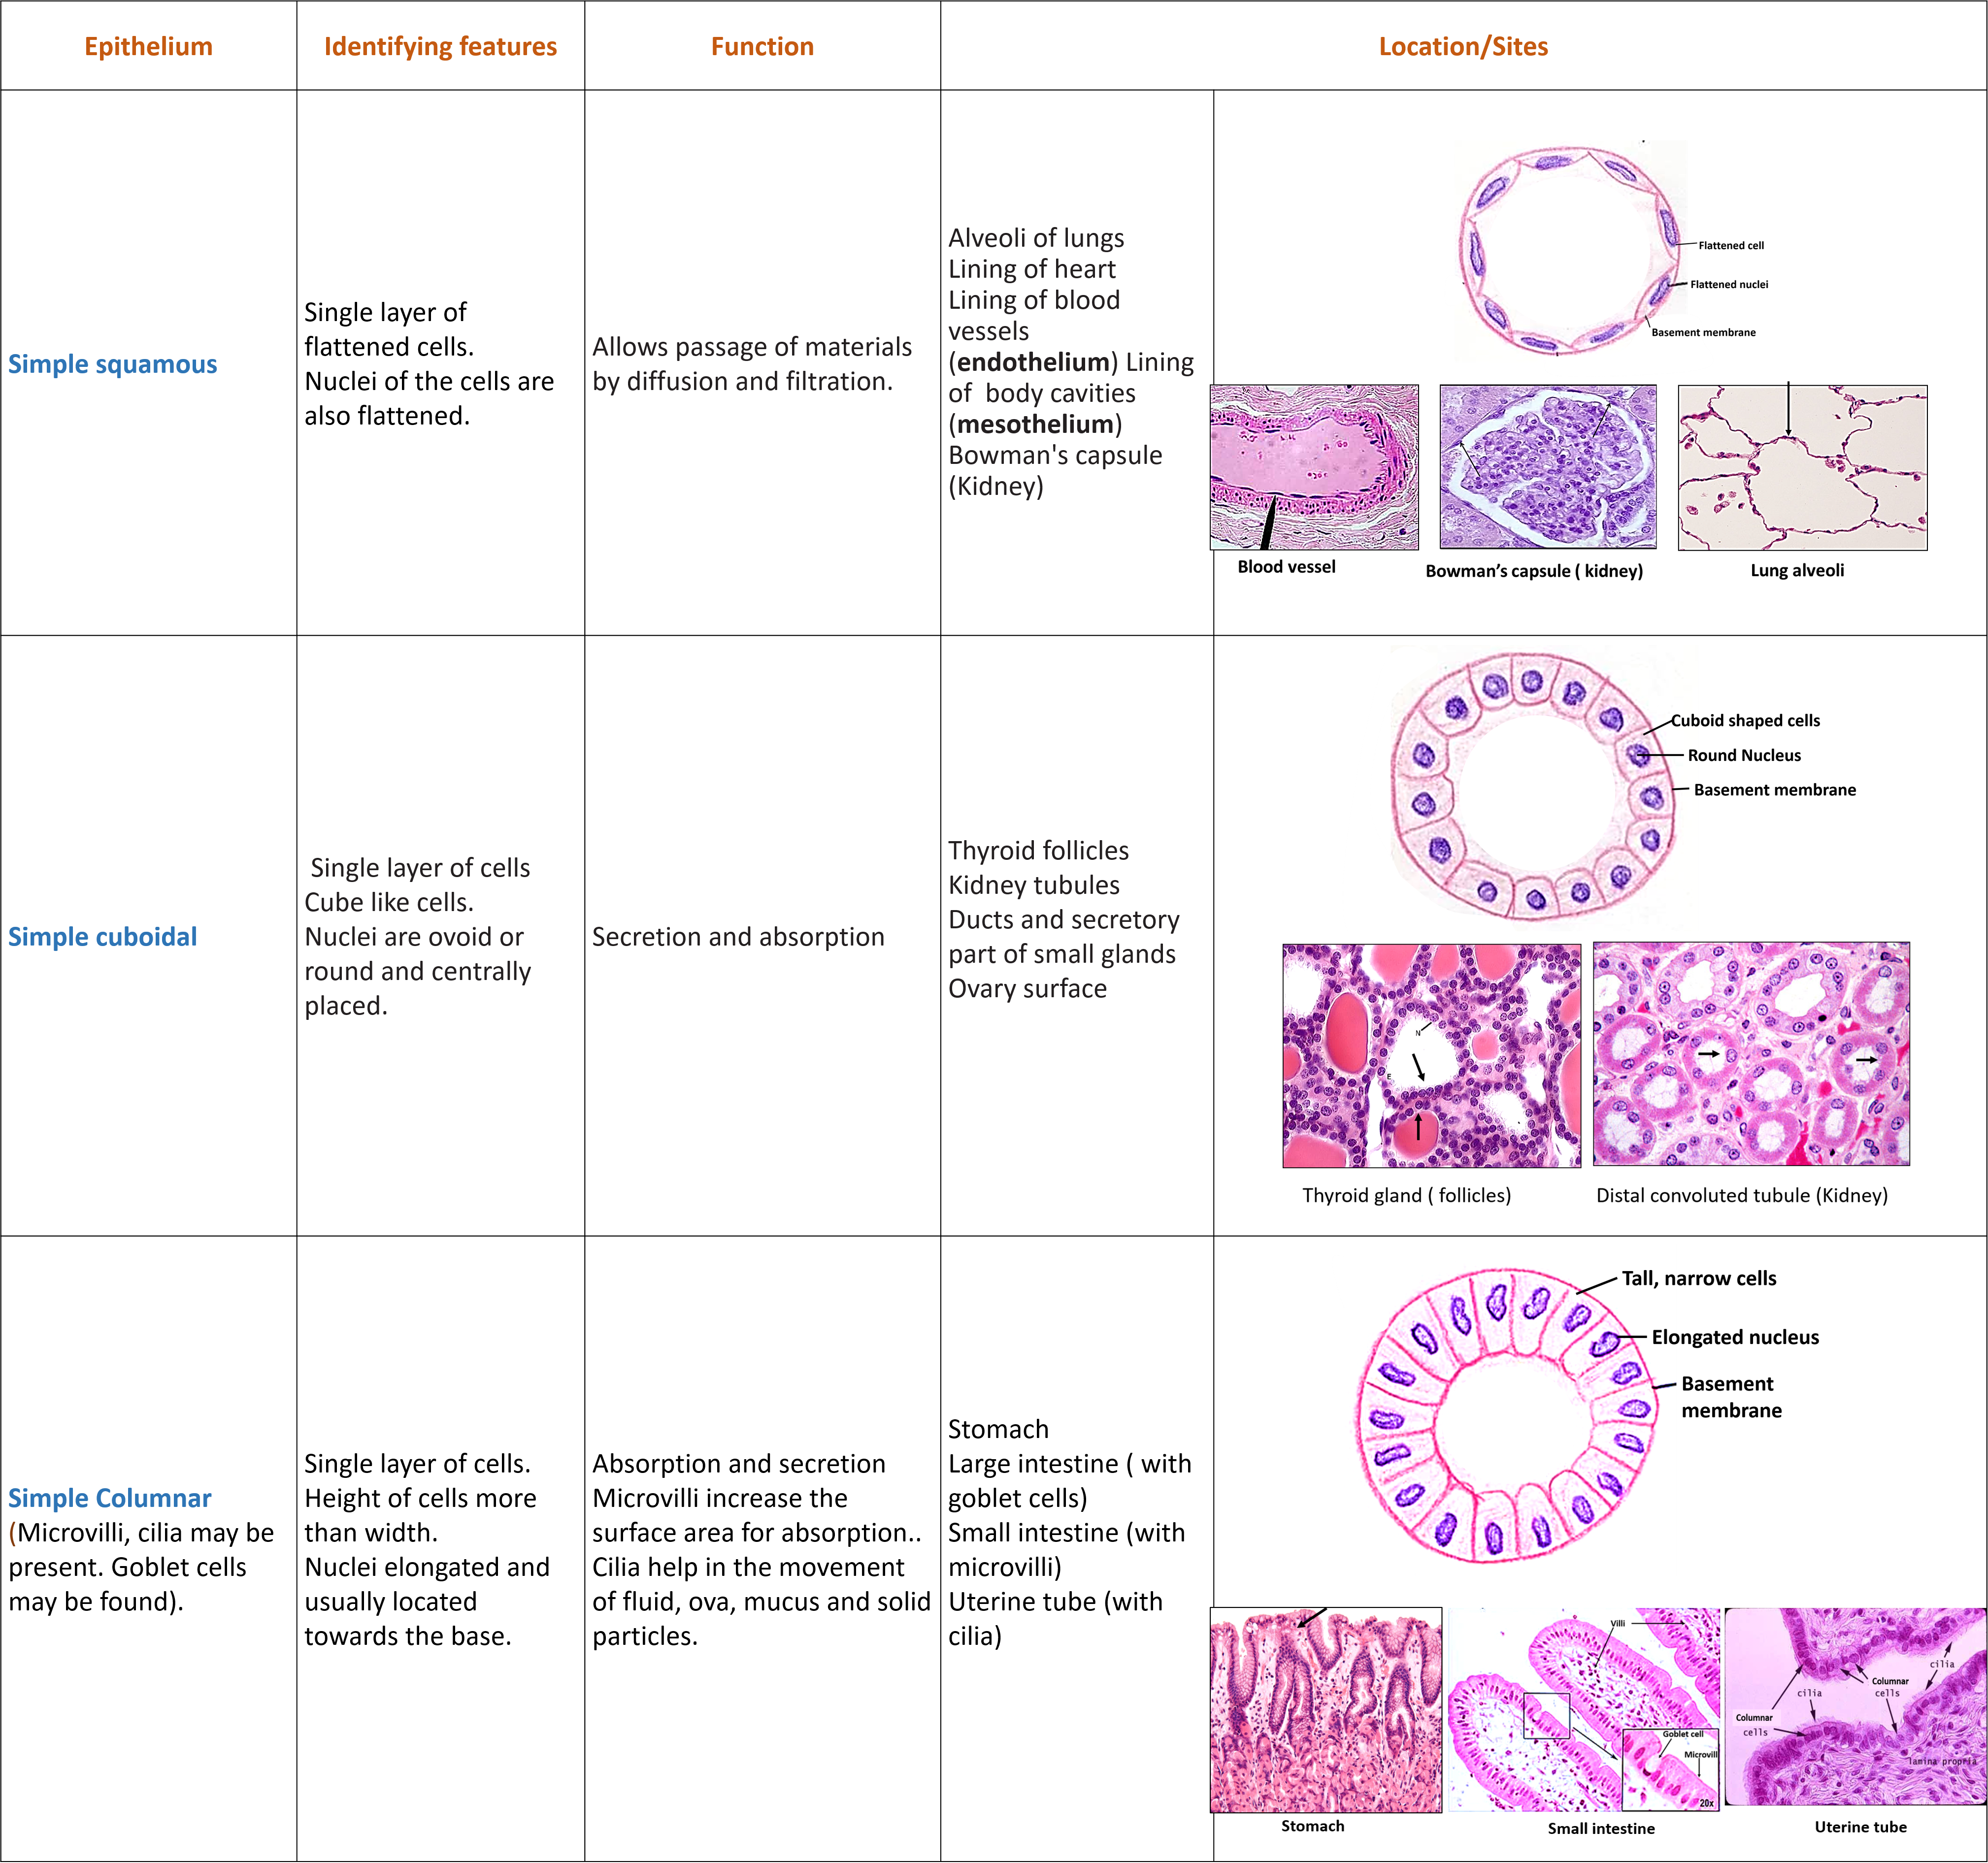 simple squamous, cuboidal and columnar epithelium, identifying features, function and sites